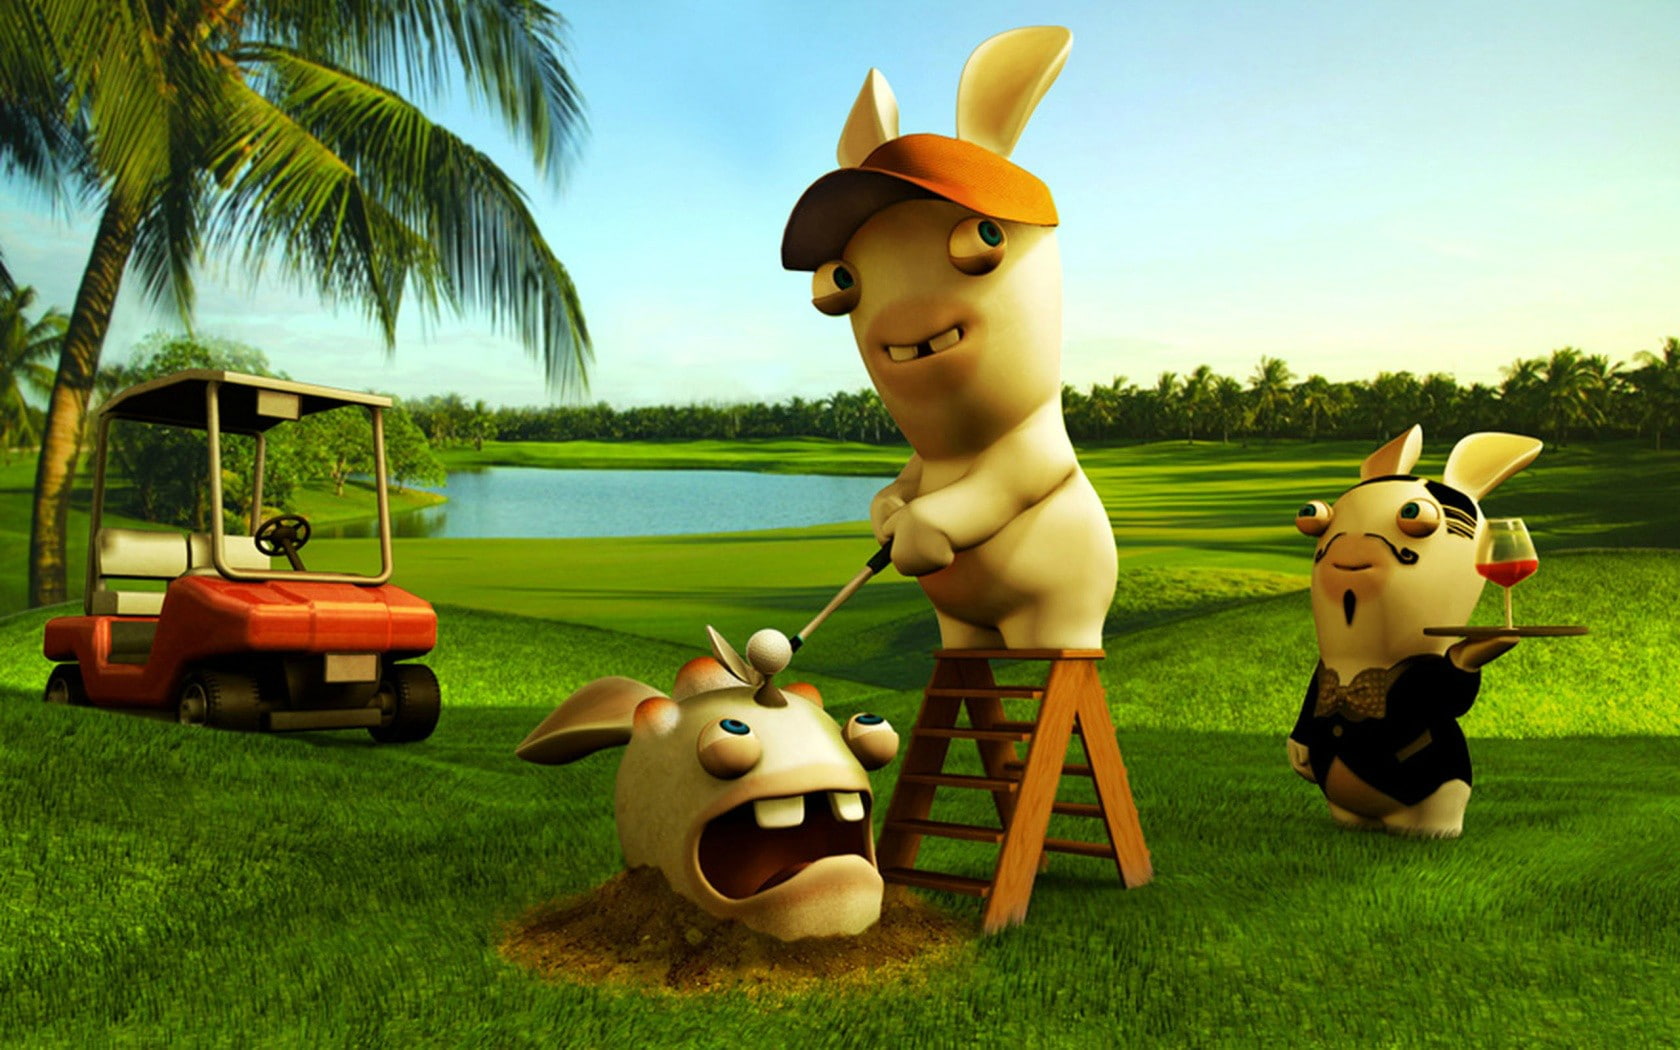 video games, Raving Rabbids, golf course, humor, palm trees